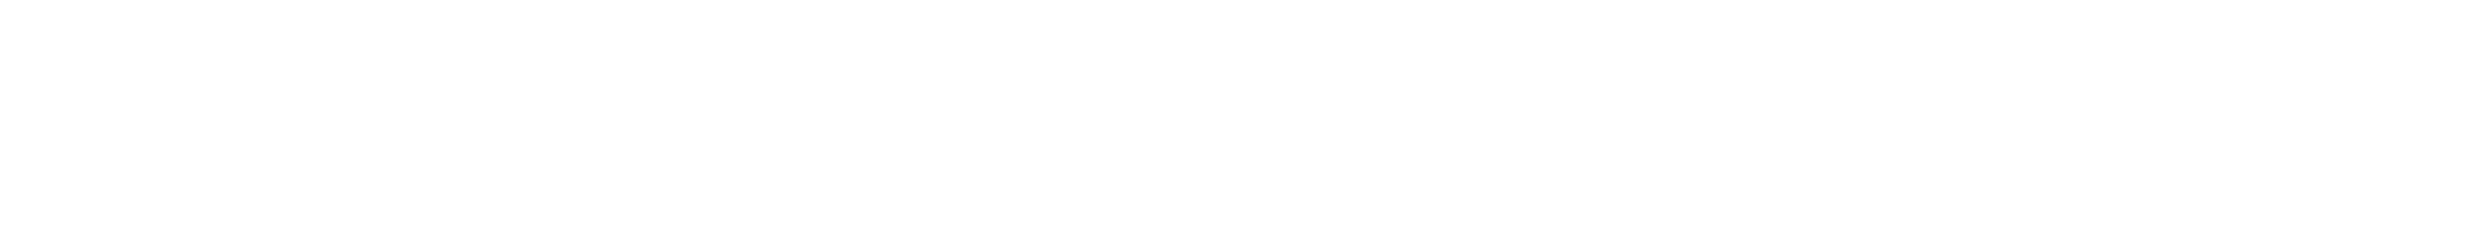 — more uptime and less fuel consumption —